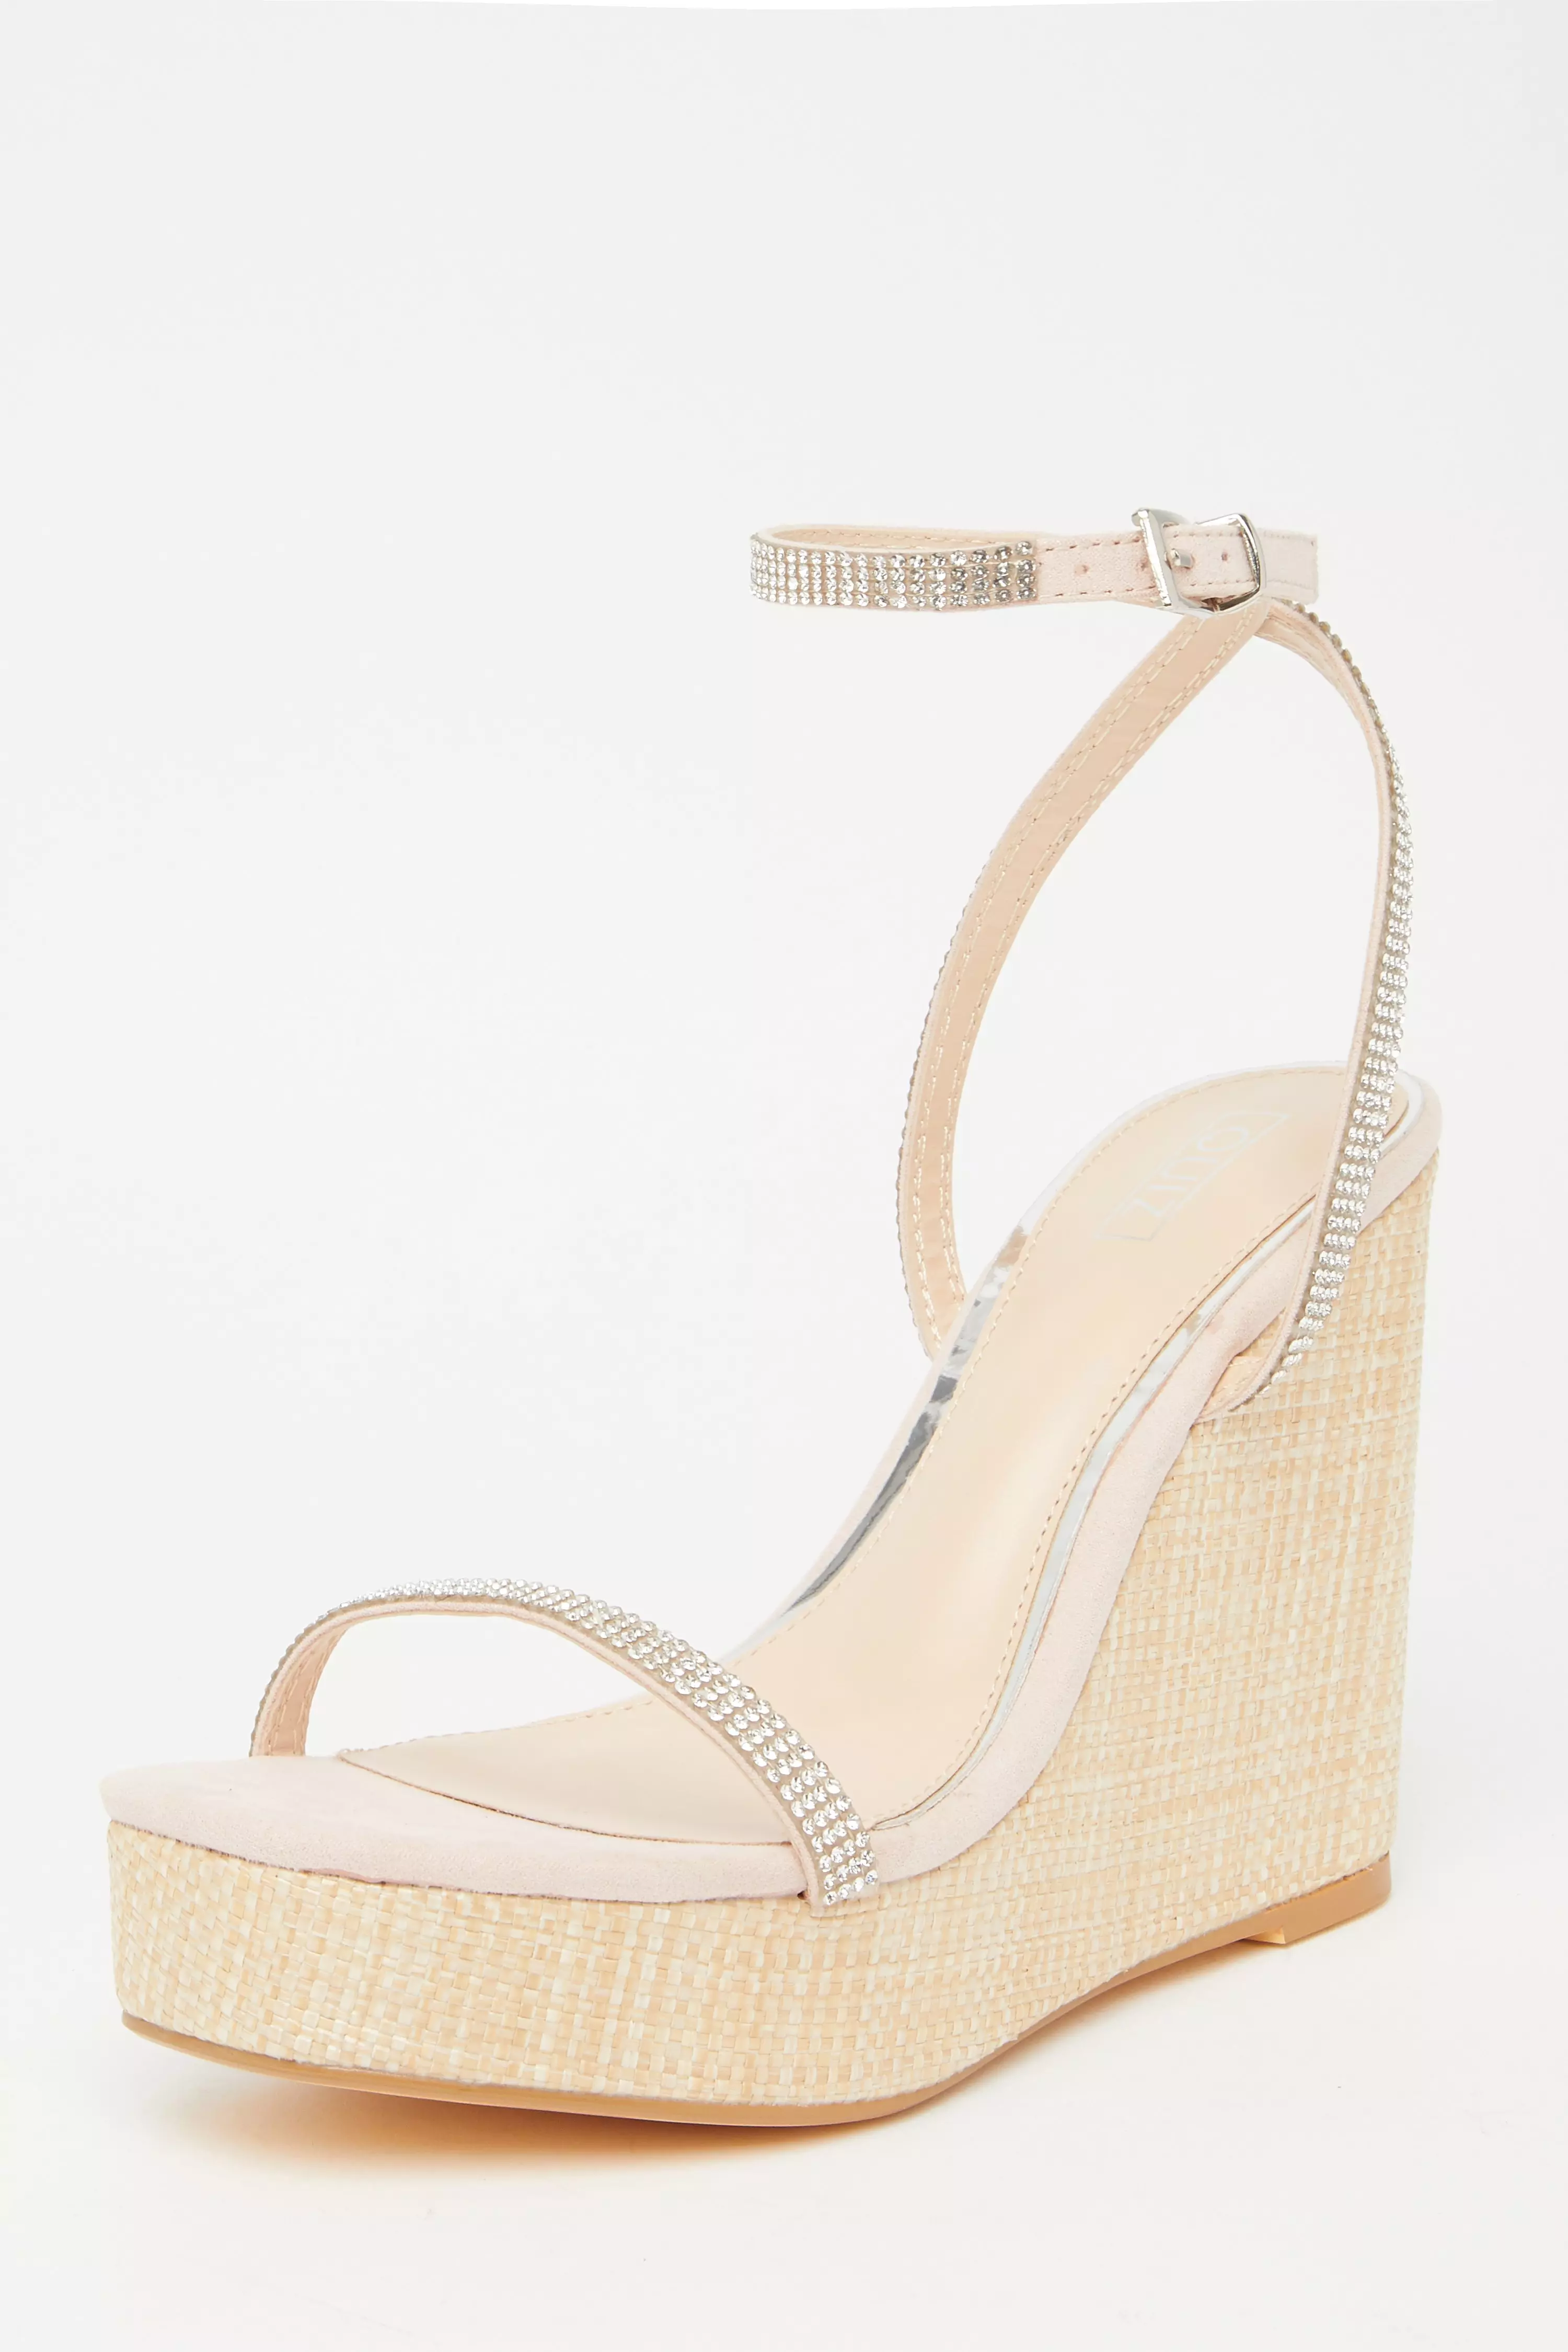 Nude Embellished Strappy Wedges